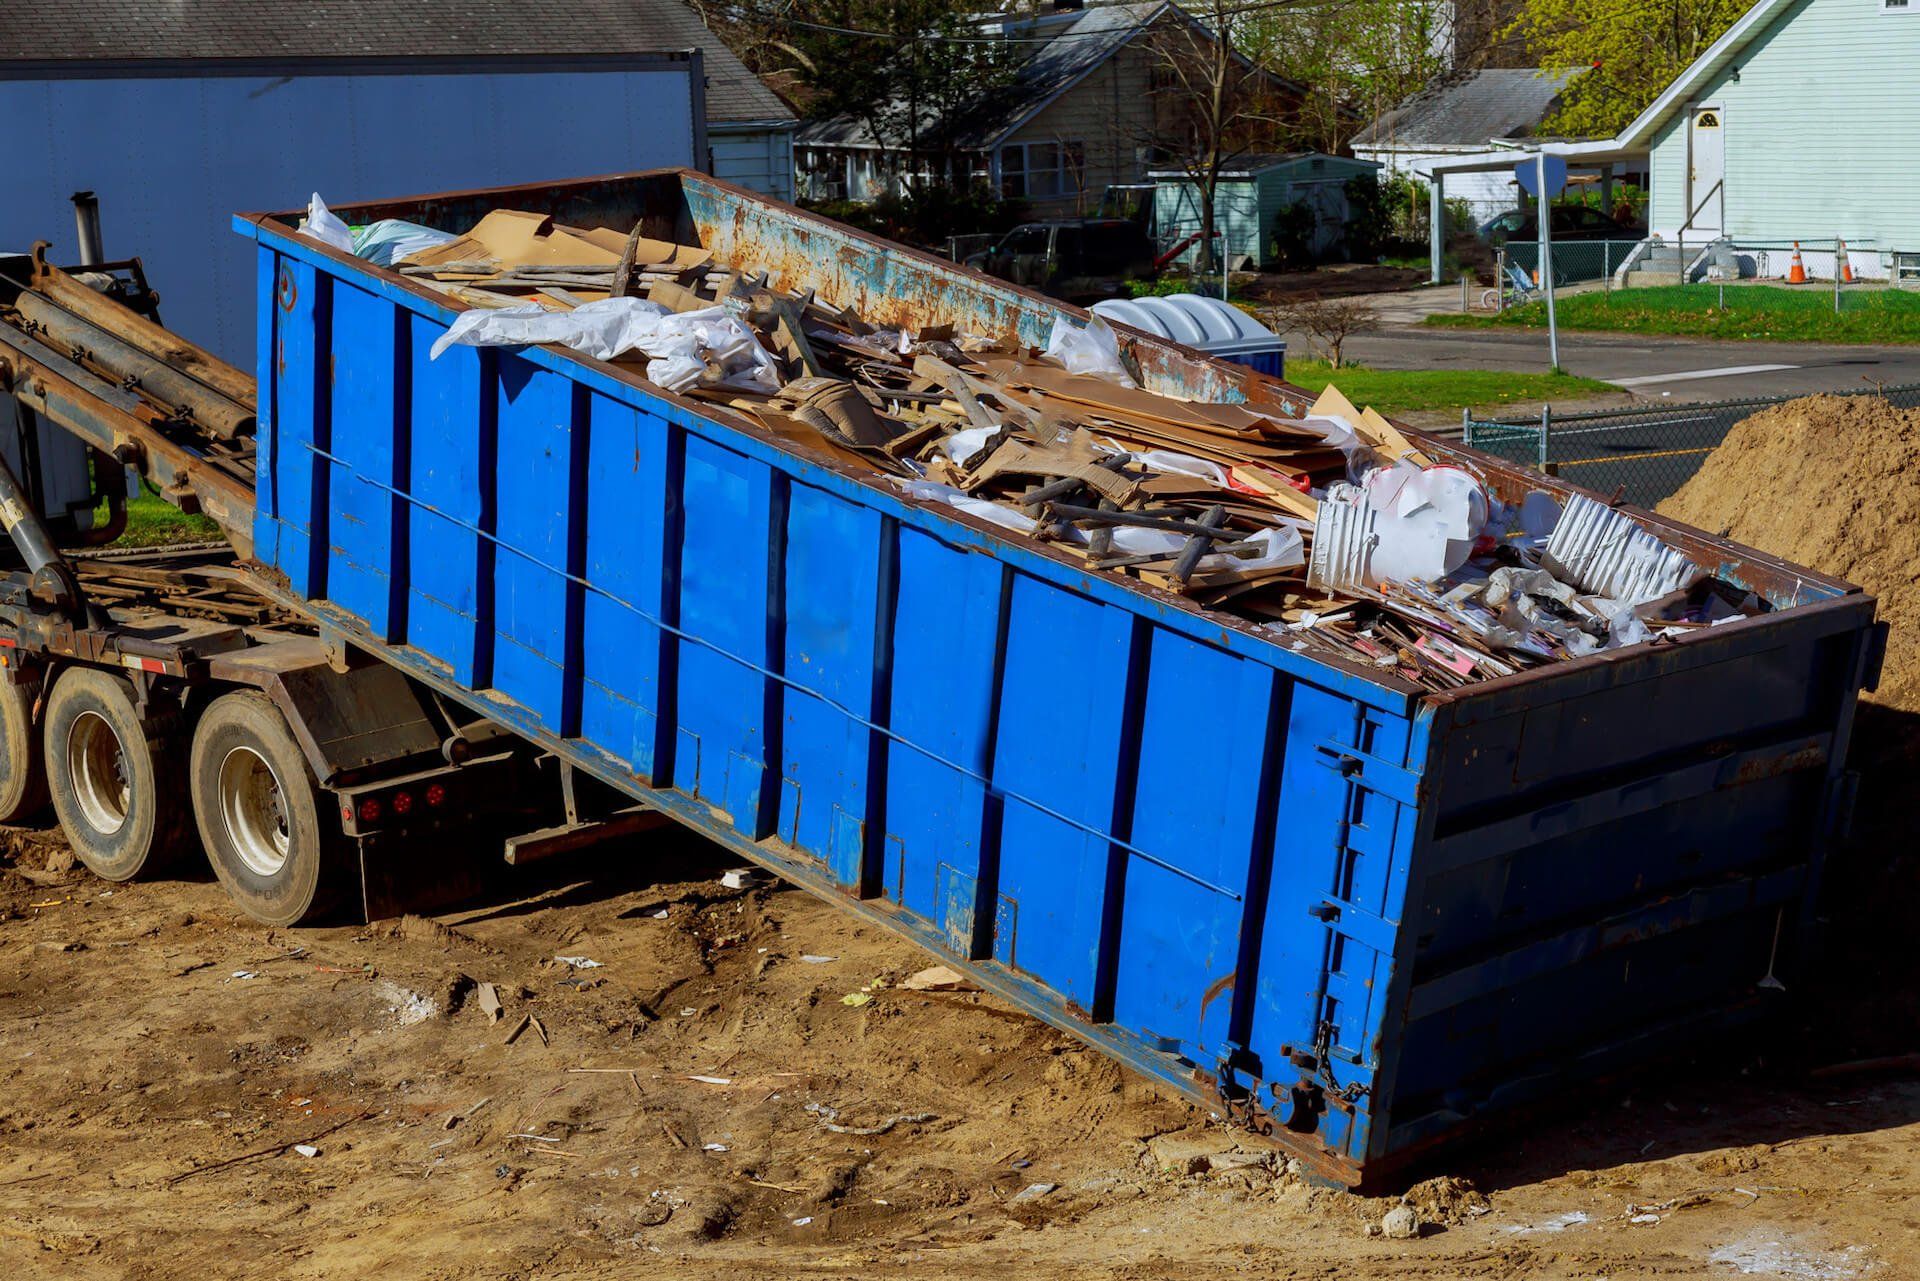 Finding Affordable Dumpster Rental Options In Detroit: Tips And Tricks ...